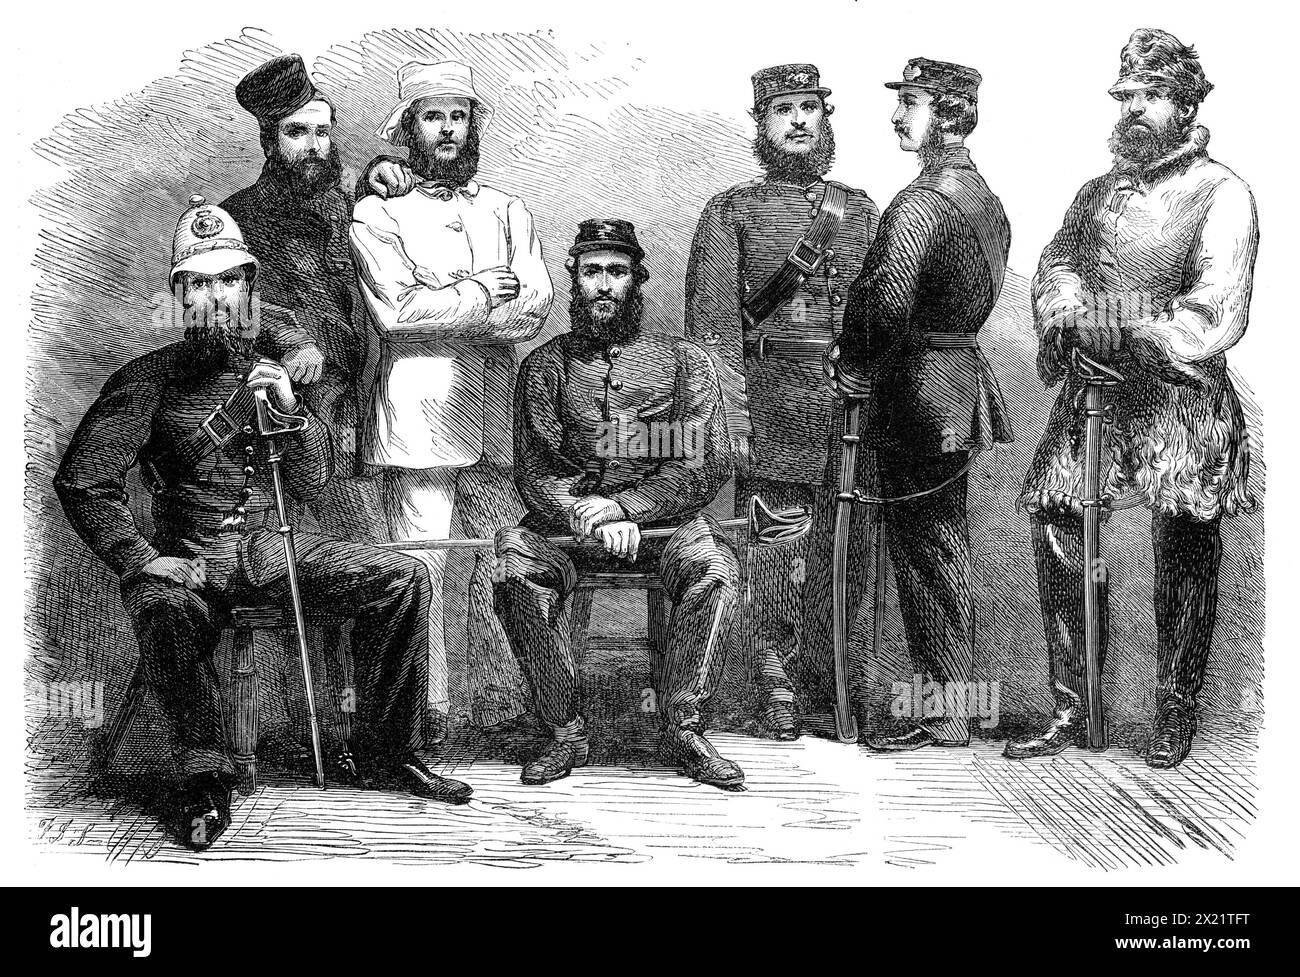 Police guard of the British Legation at Pekin, 1864. Engraving from a photograph by John and Charles Watkins, of '...the costume and appearance of a party of men, selected by the Metropolitan Commissioners of Police, with the sanction of the Home Secretary, to proceed to China, there to form an escort for her Majesty's Minister at Pekin, and to act as a guard for the Legation premises. They left London for China by the overland route on the 20th of last month. The ordinary uniform that has been selected is a blue tunic with scarlet piping, a cork helmet covered with white jean, with plate and Stock Photo